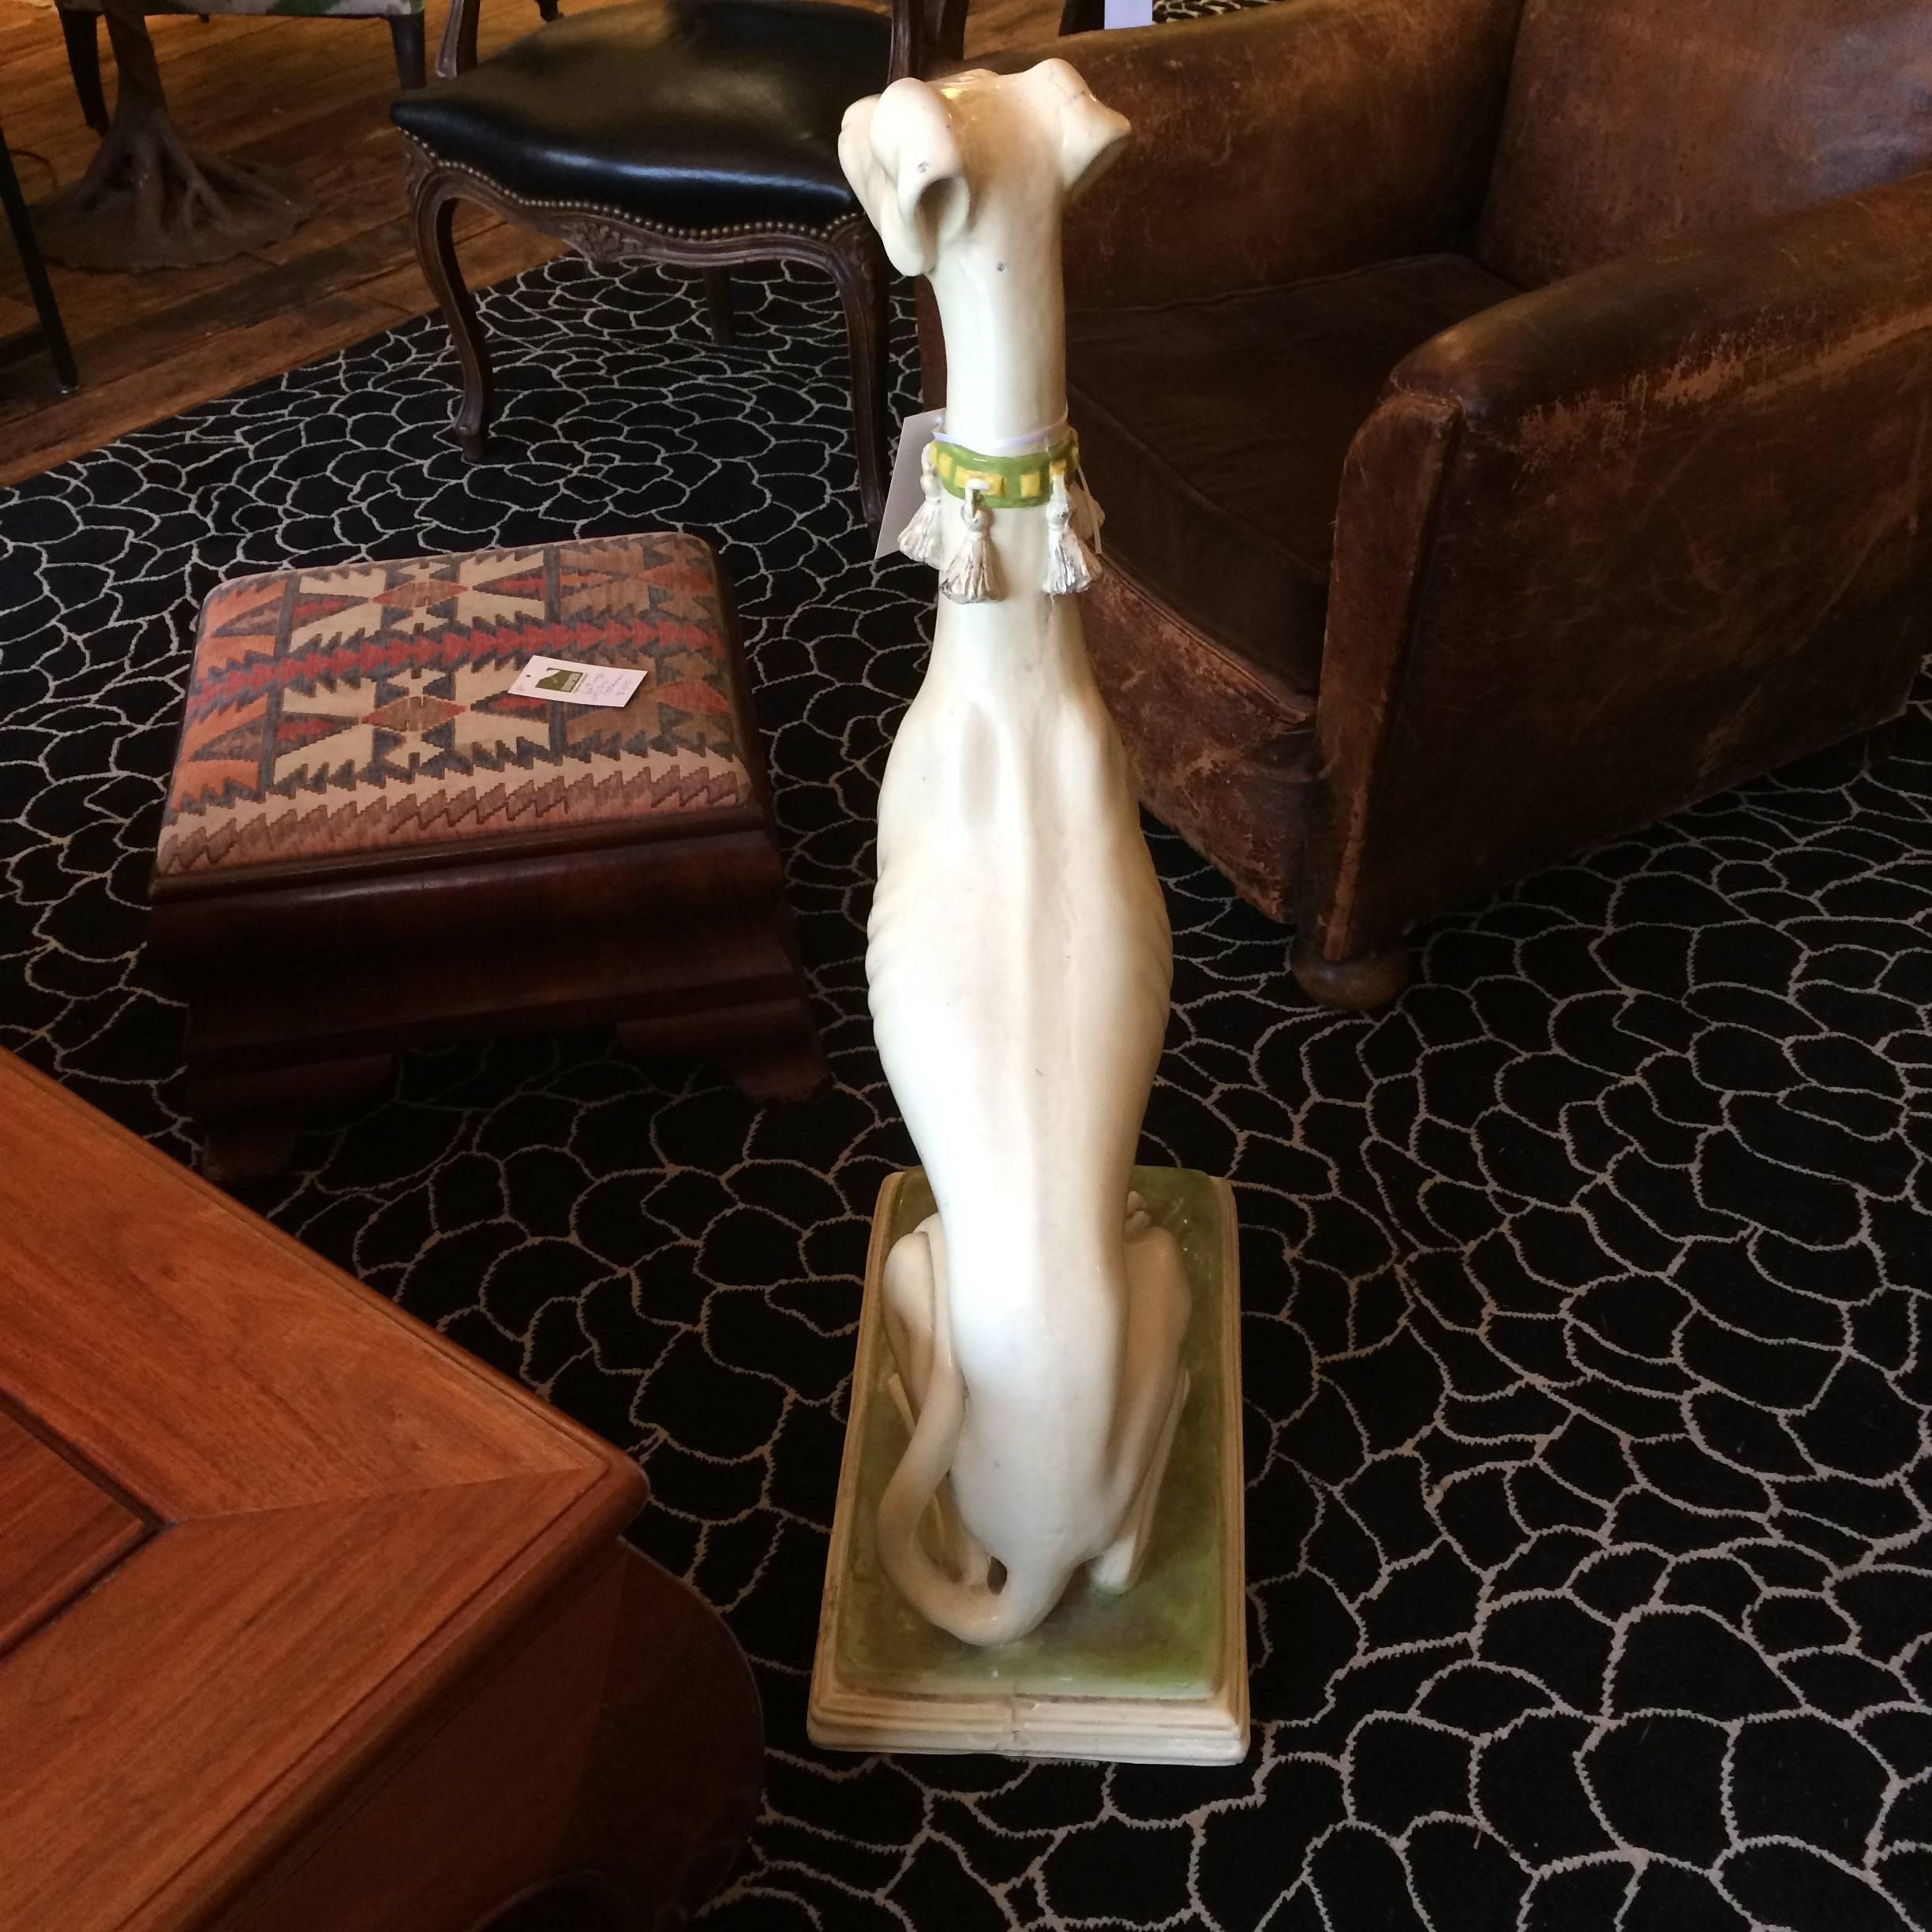 lifesize darling ceramic sculpture of a whippet dog, by Marwal Inc.